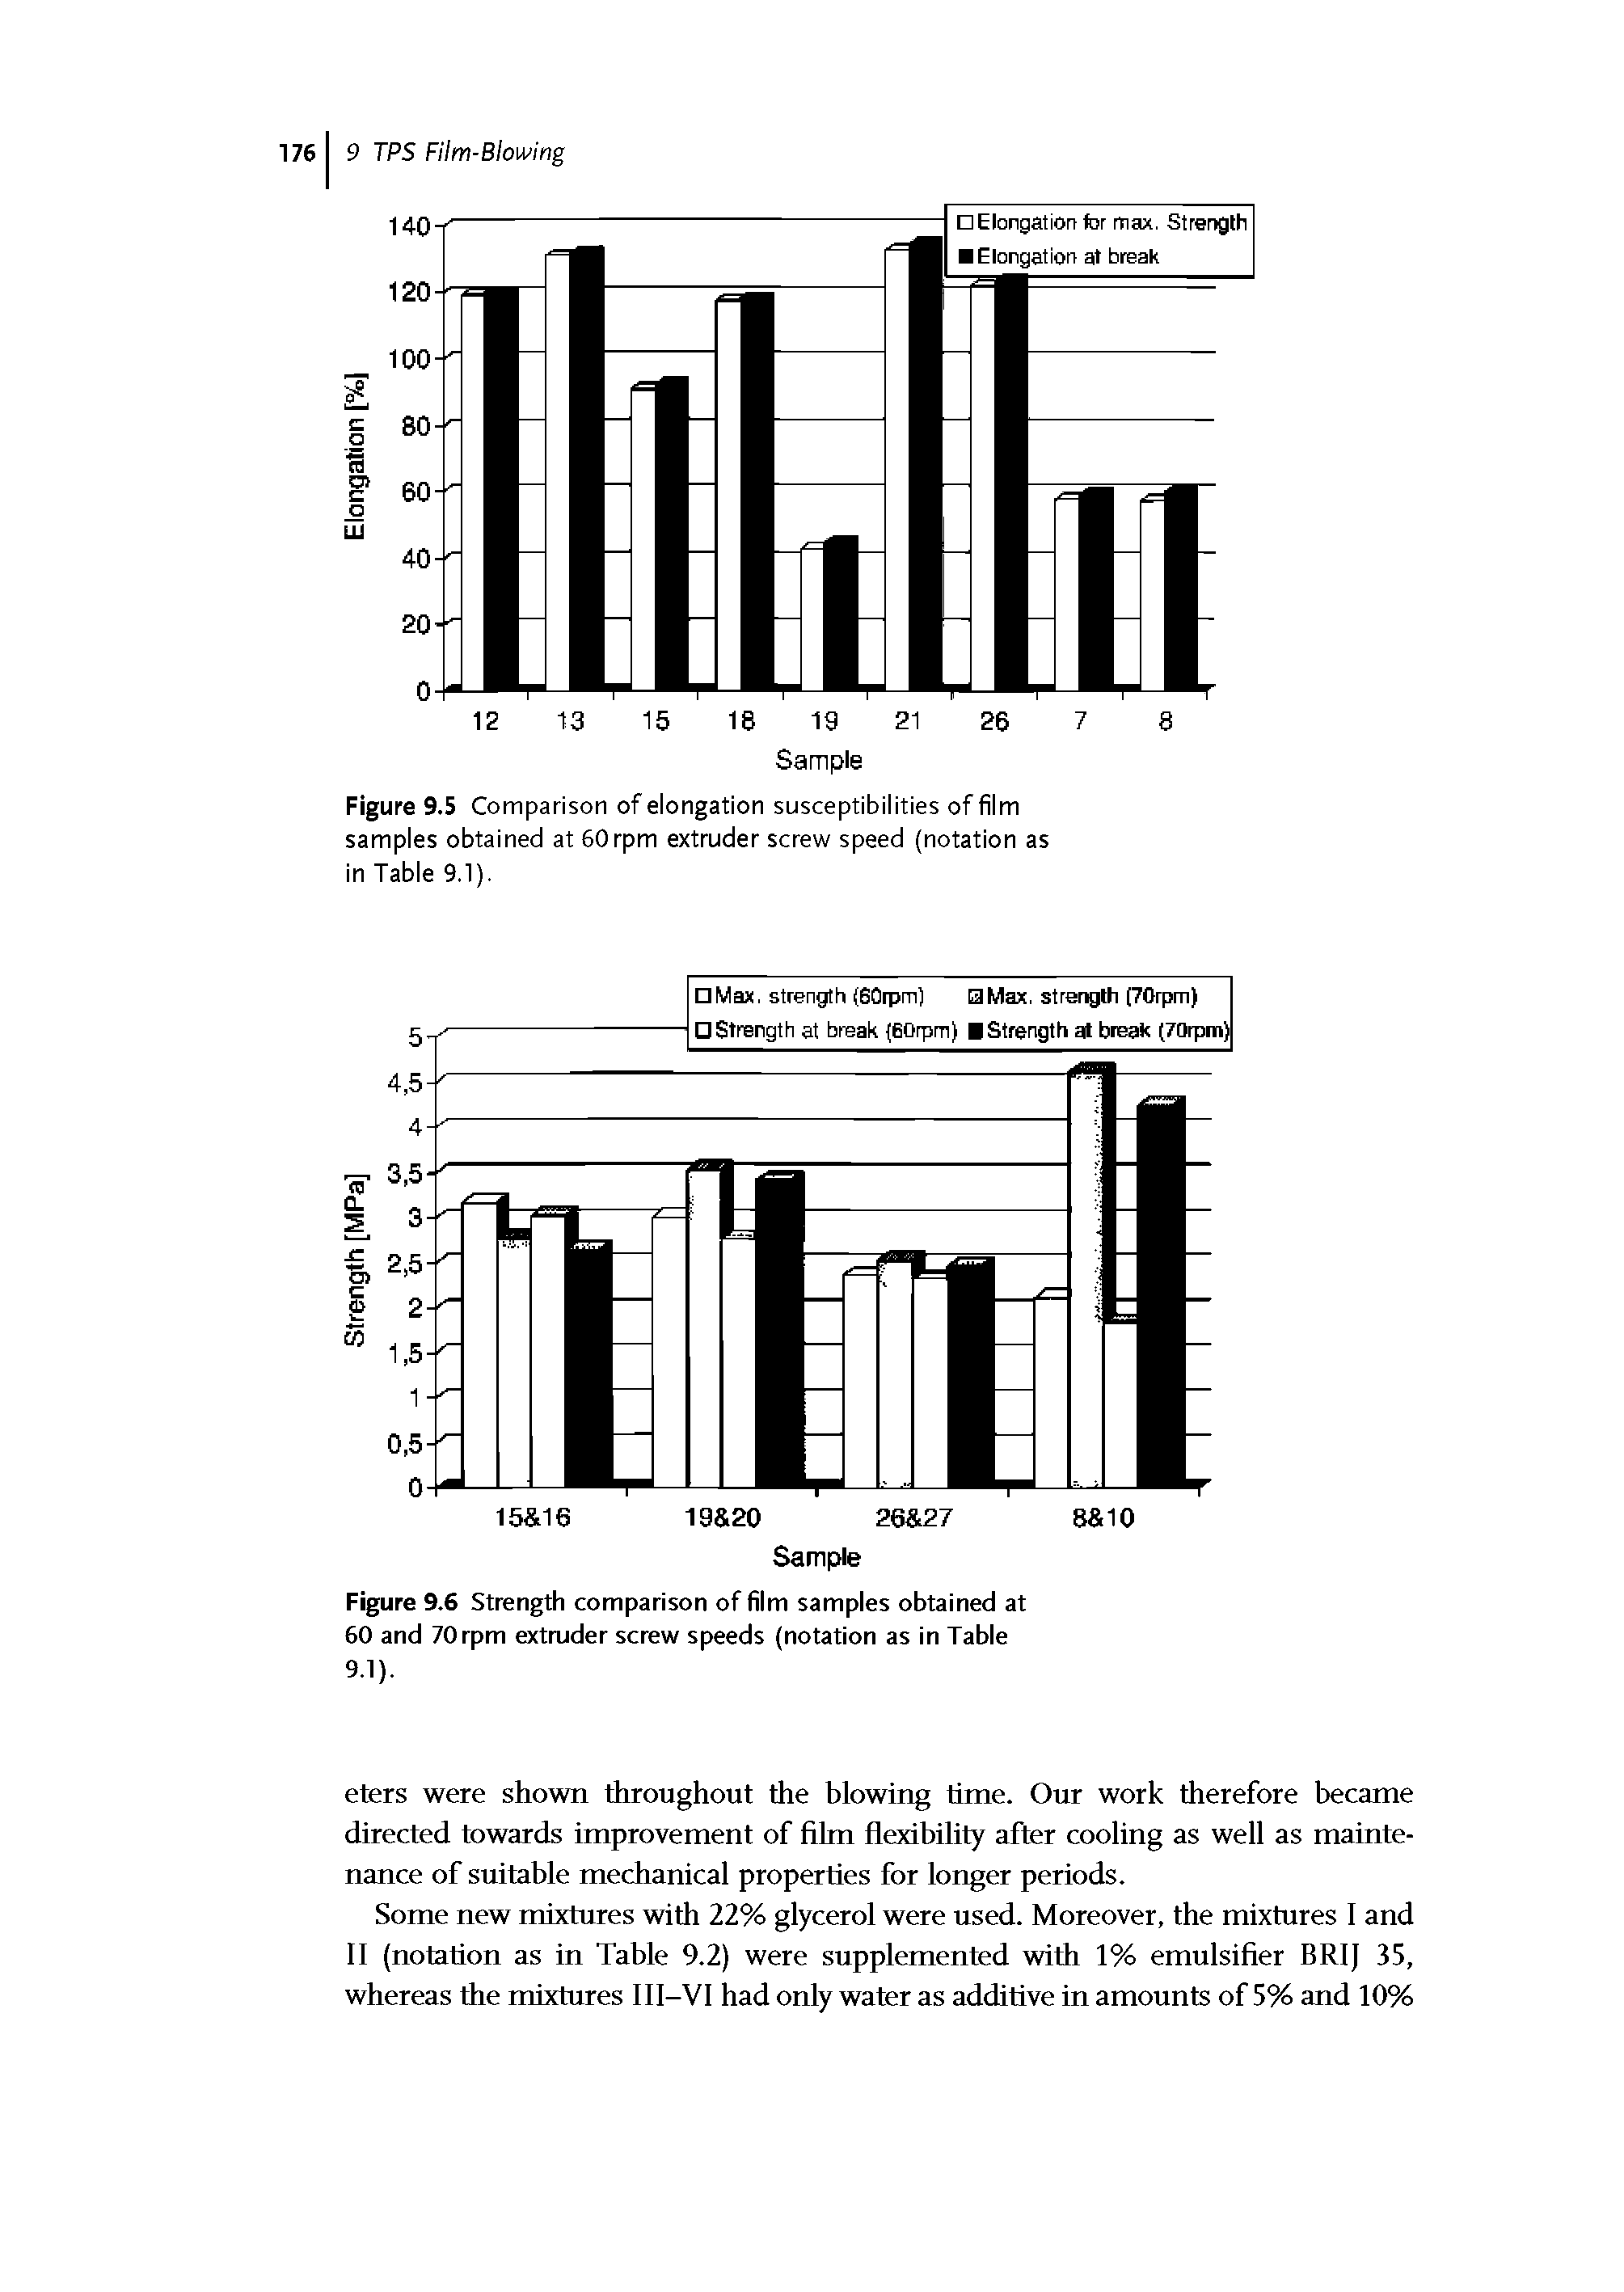 Figure 9.5 Comparison of elongation susceptibilities of film samples obtained at 60rpm extruder screw speed (notation as in Table 9.1).